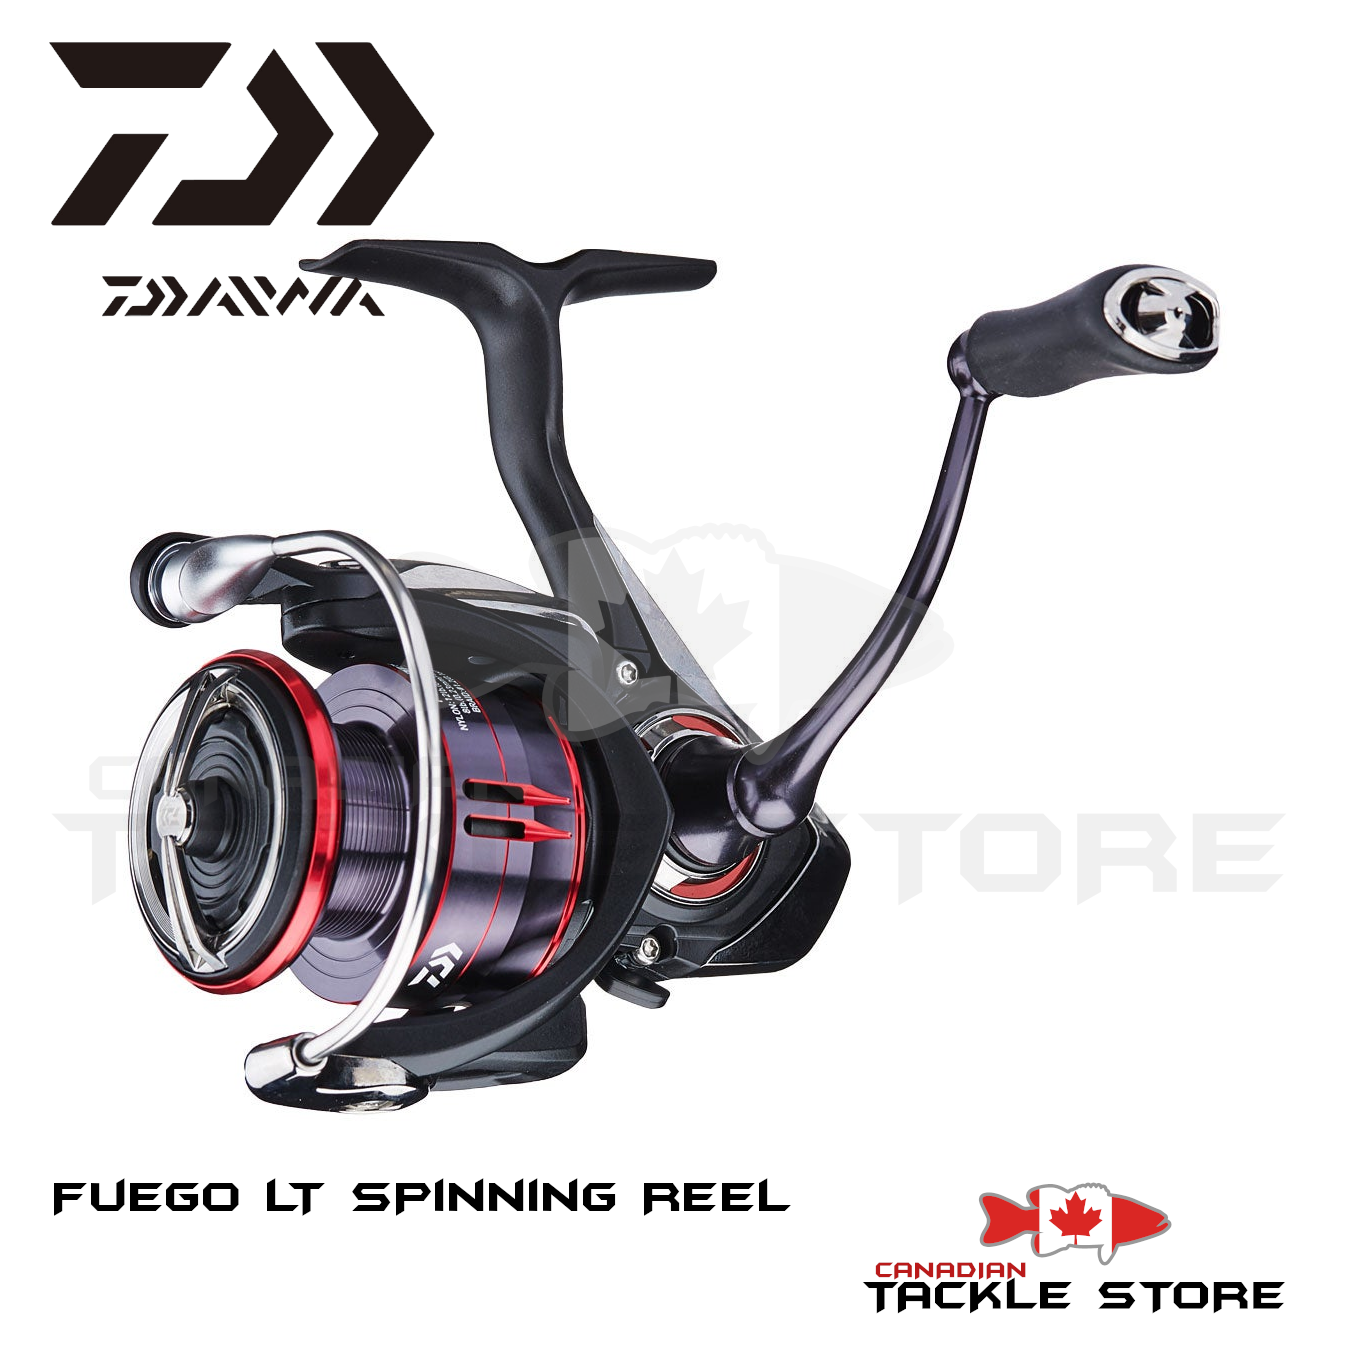 Daiwa Fuego LT Spinning Reel – Canadian Tackle Store